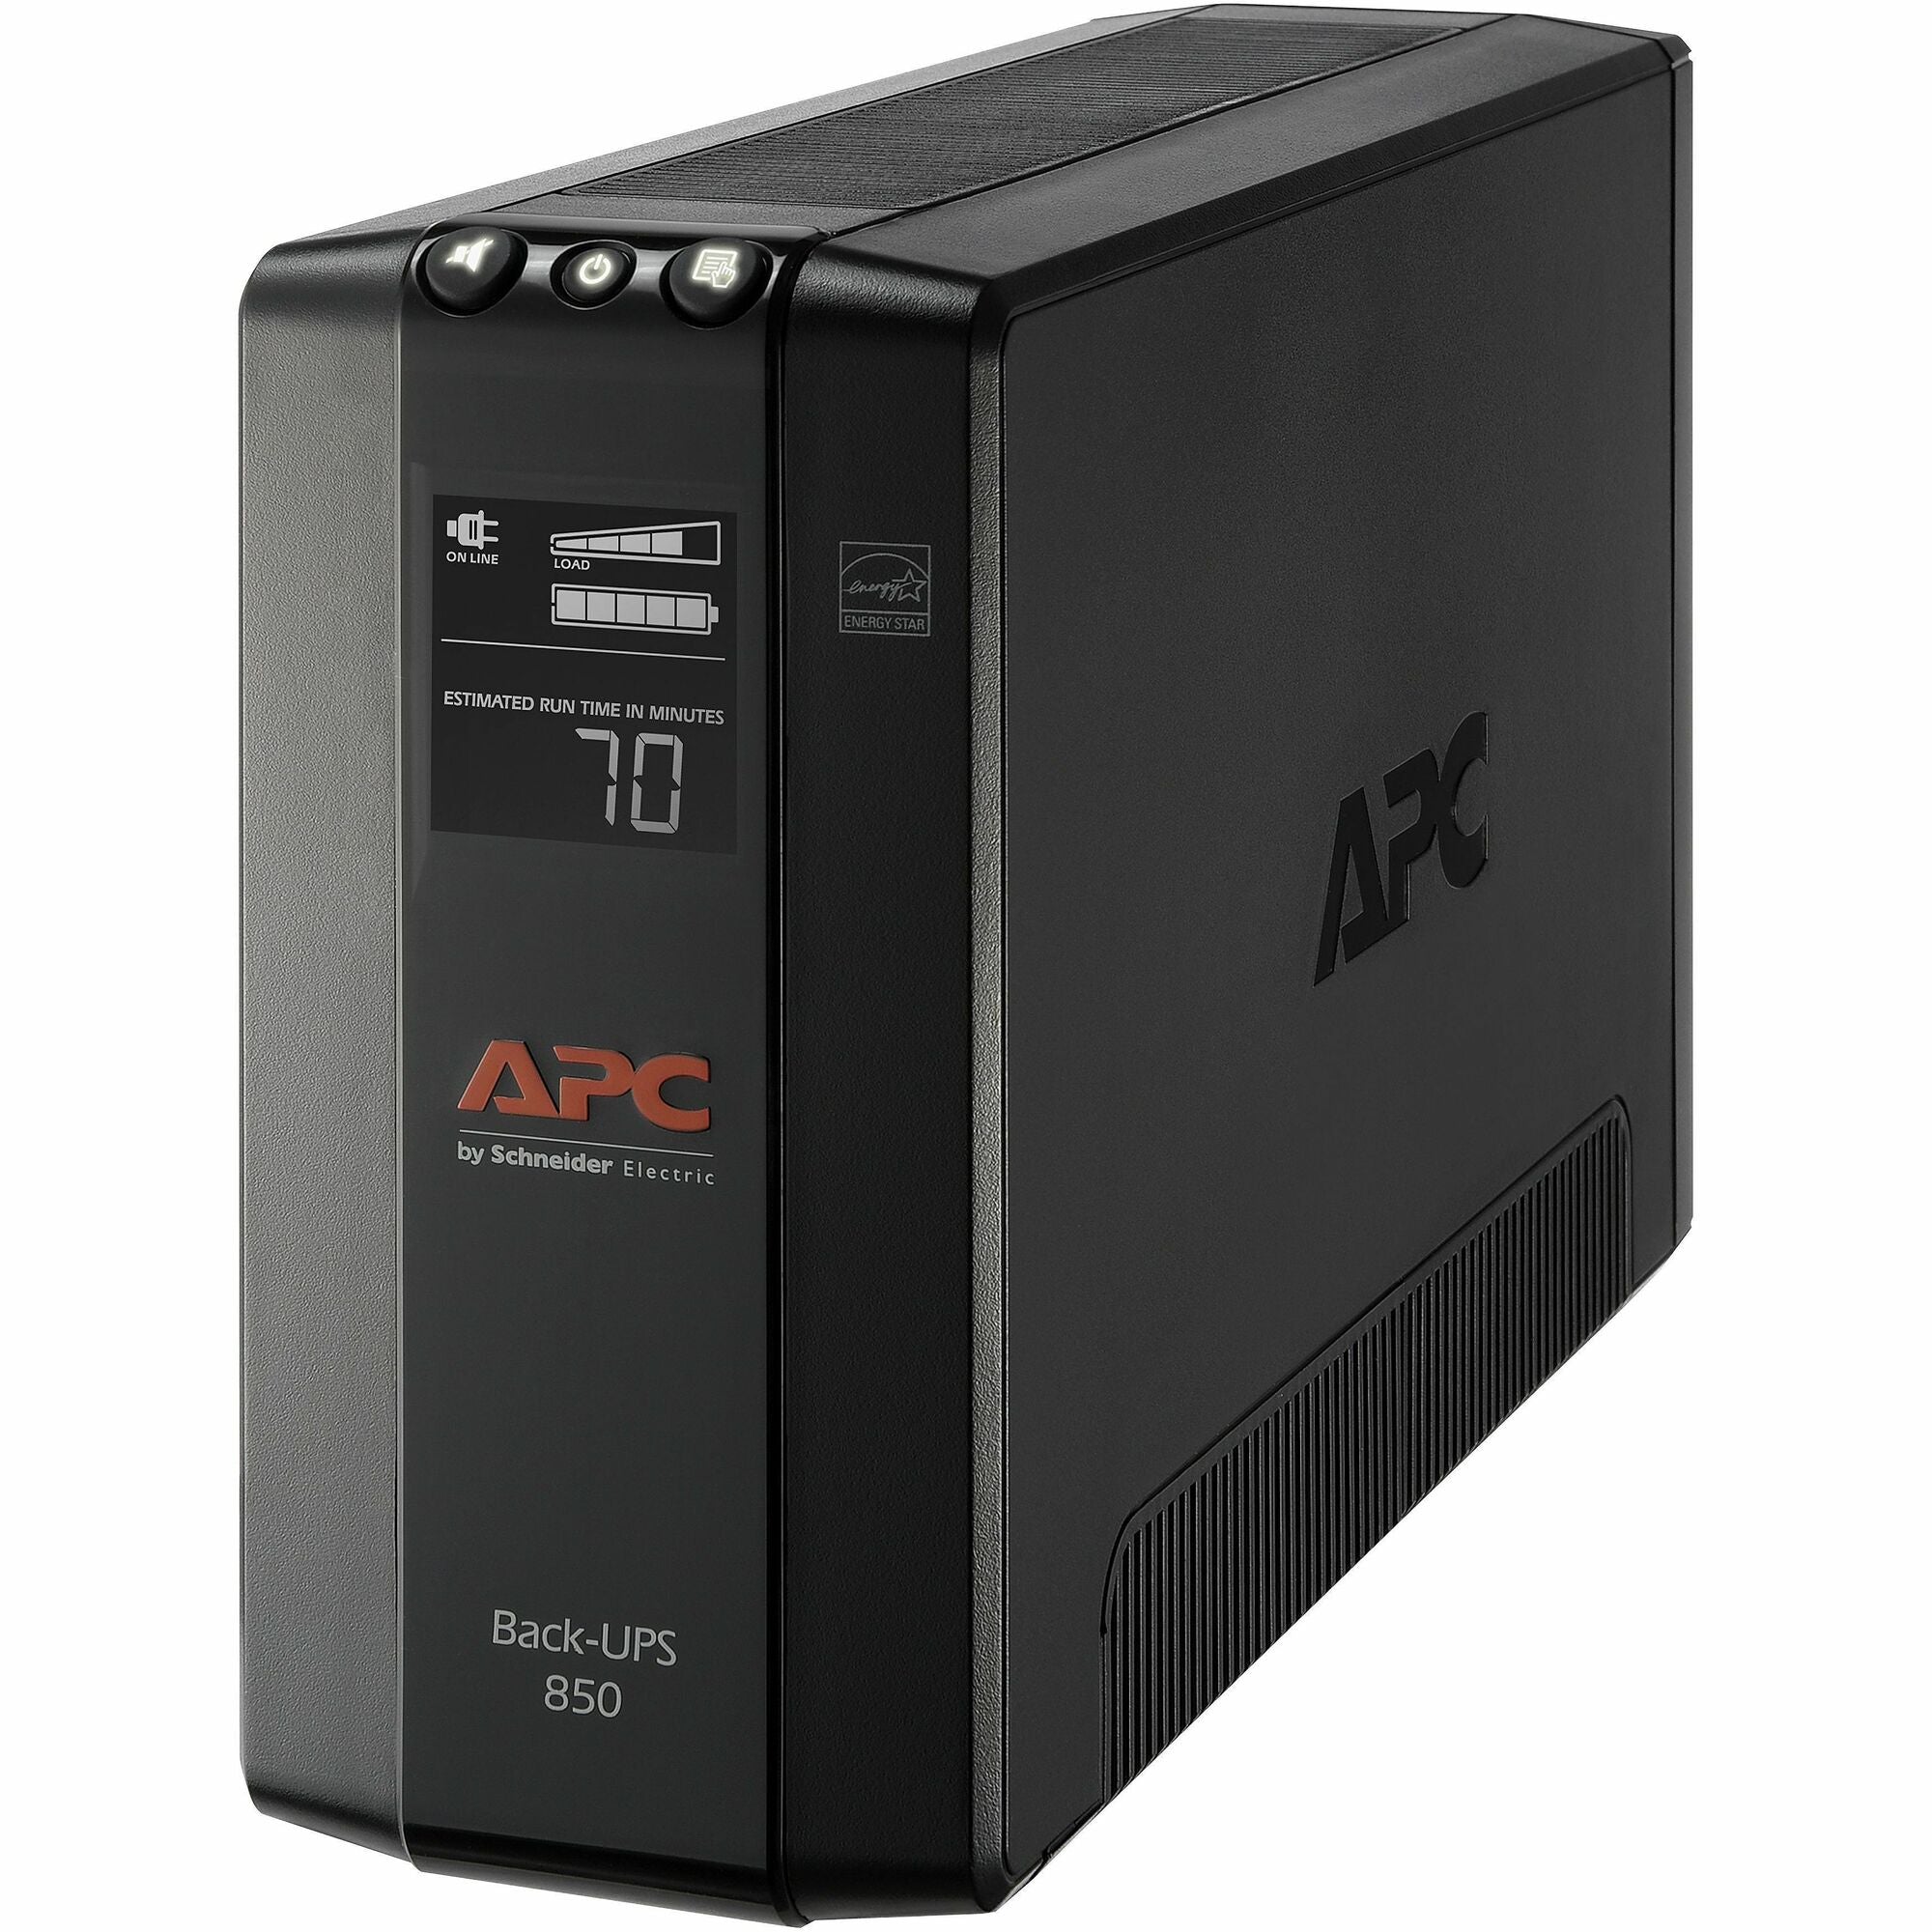 APC by Schneider Electric Back UPS Pro BX850M, Compact Tower, 850VA, AVR, LCD, 120V - Tower - 12 Hour Recharge - 2 Minute Stand-by - 120 V Input - 120 V AC Output - Stepped Approximated Sine Wave - 4 x NEMA 5-15R Surge, 4 x NEMA 5-15R - 8 x Battery/S - 1